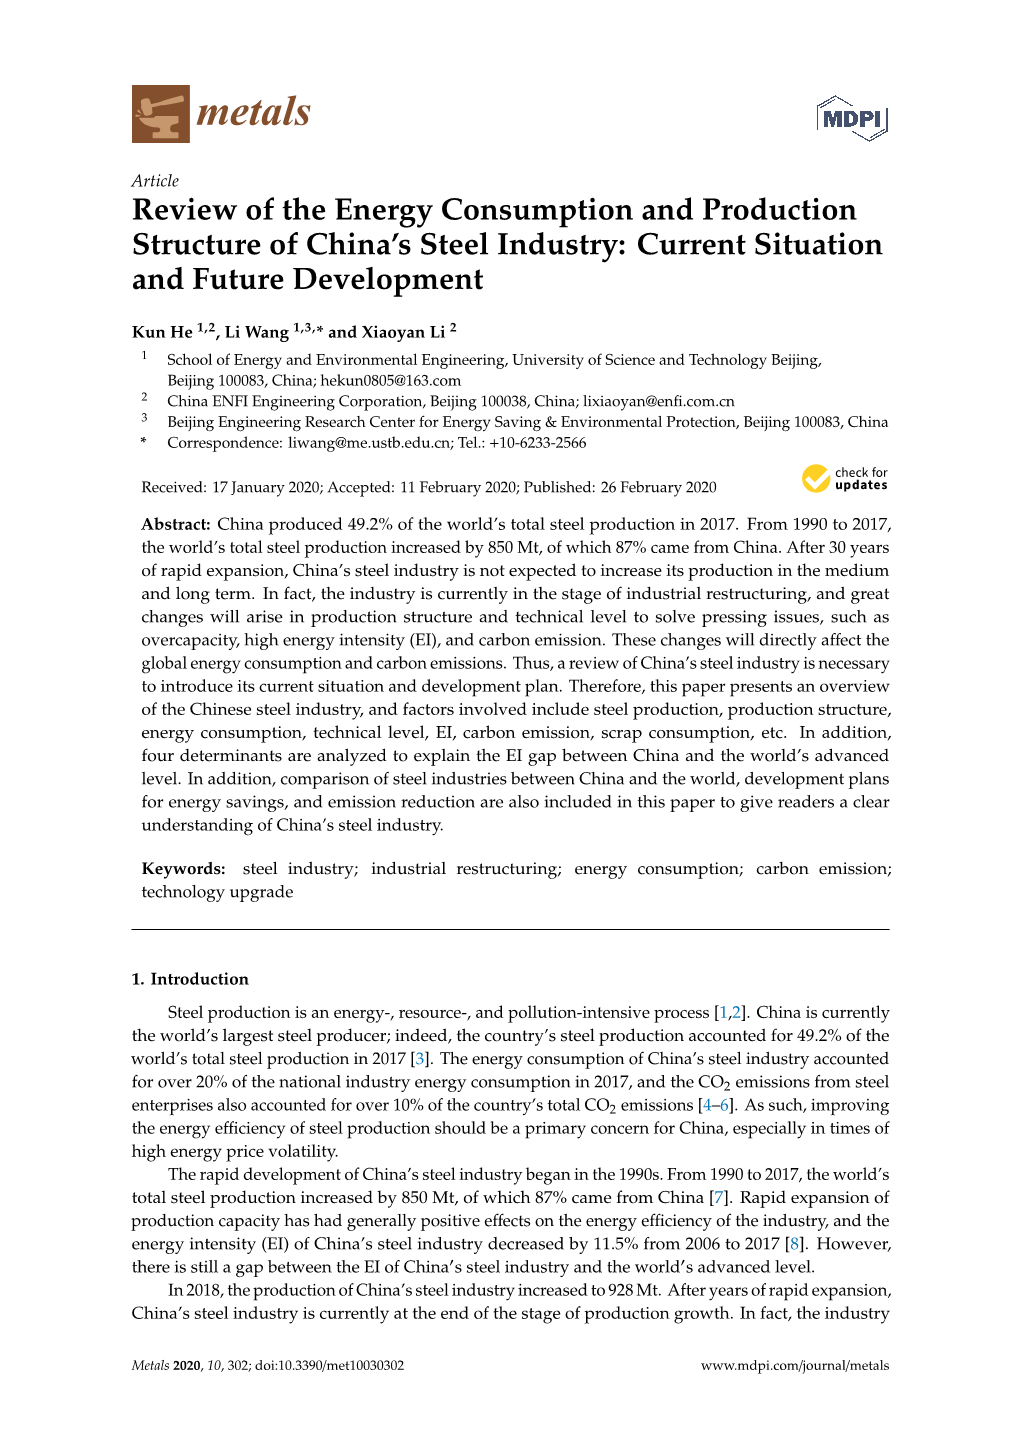 Review of the Energy Consumption and Production Structure of China's